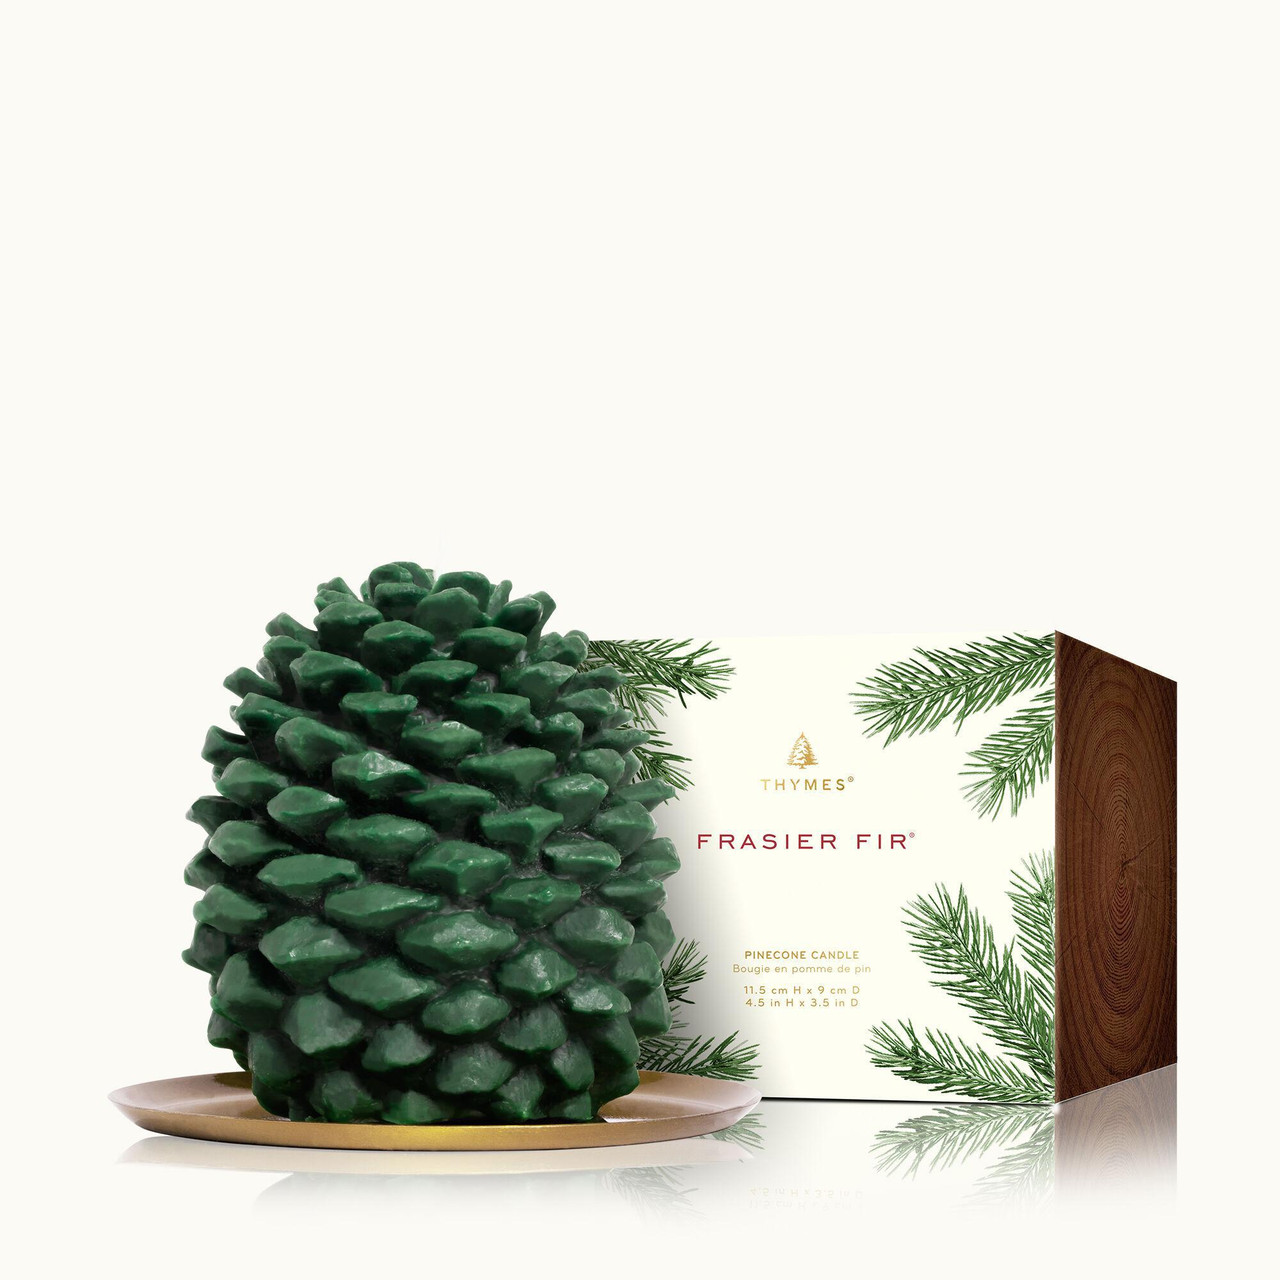 Thymes Frasier Fir Petite Diffuser Vase Set and Candle 